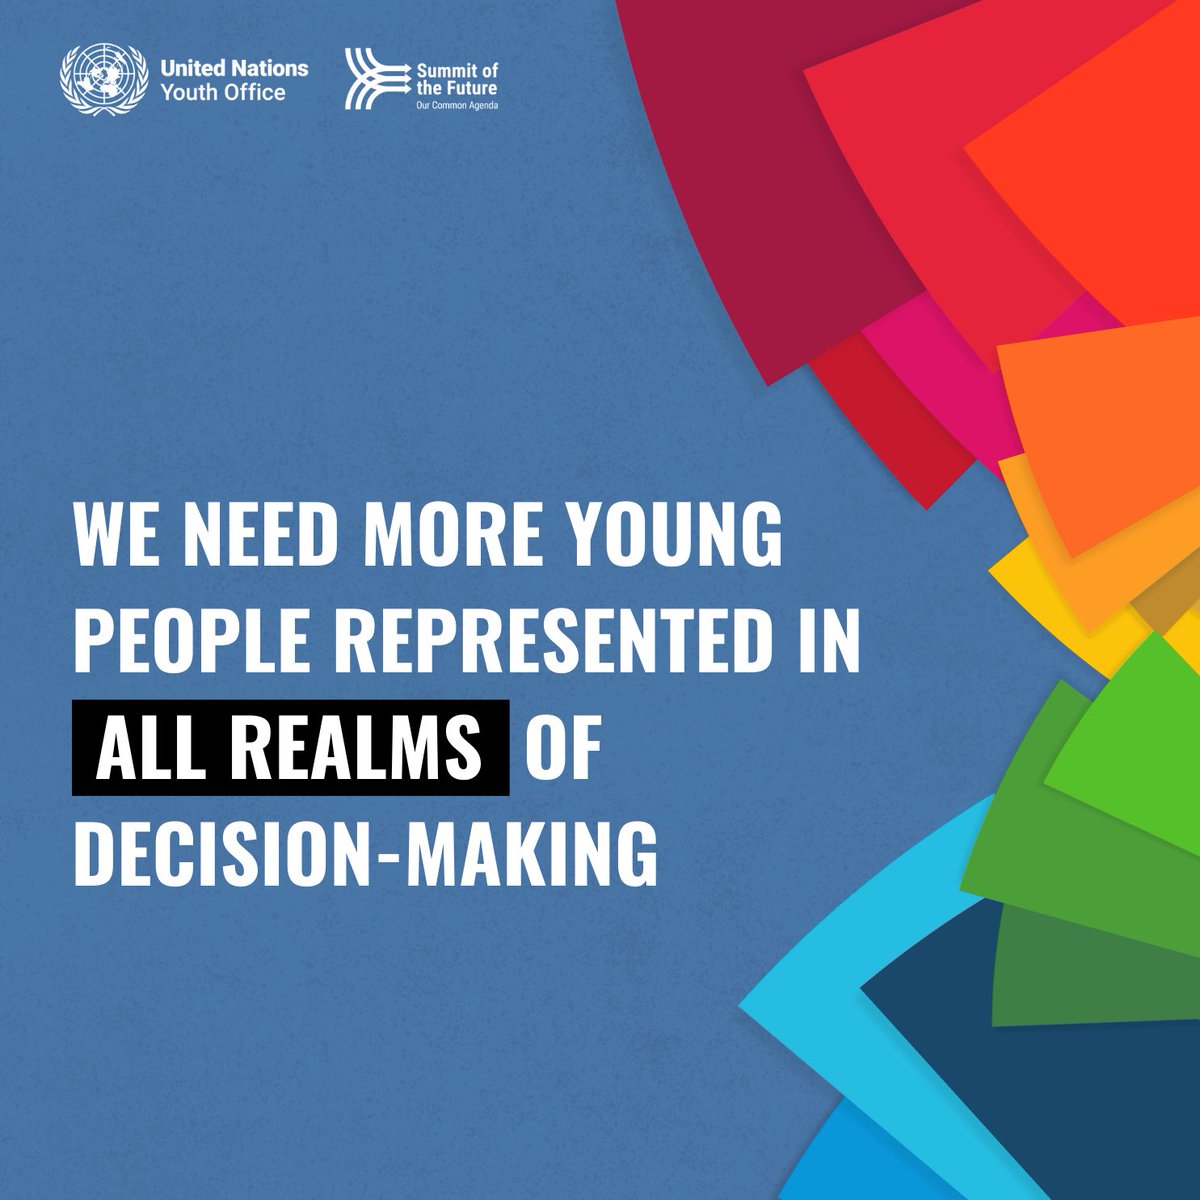 As we gear up for the Summit of the Future in September, I’m committed to making sure youth play a strong role in it. I invite all young people to sign the @UNYouthAffairs open letter to world leaders calling for urgent, inclusive change. forms.office.com/pages/response… #OurCommonFuture